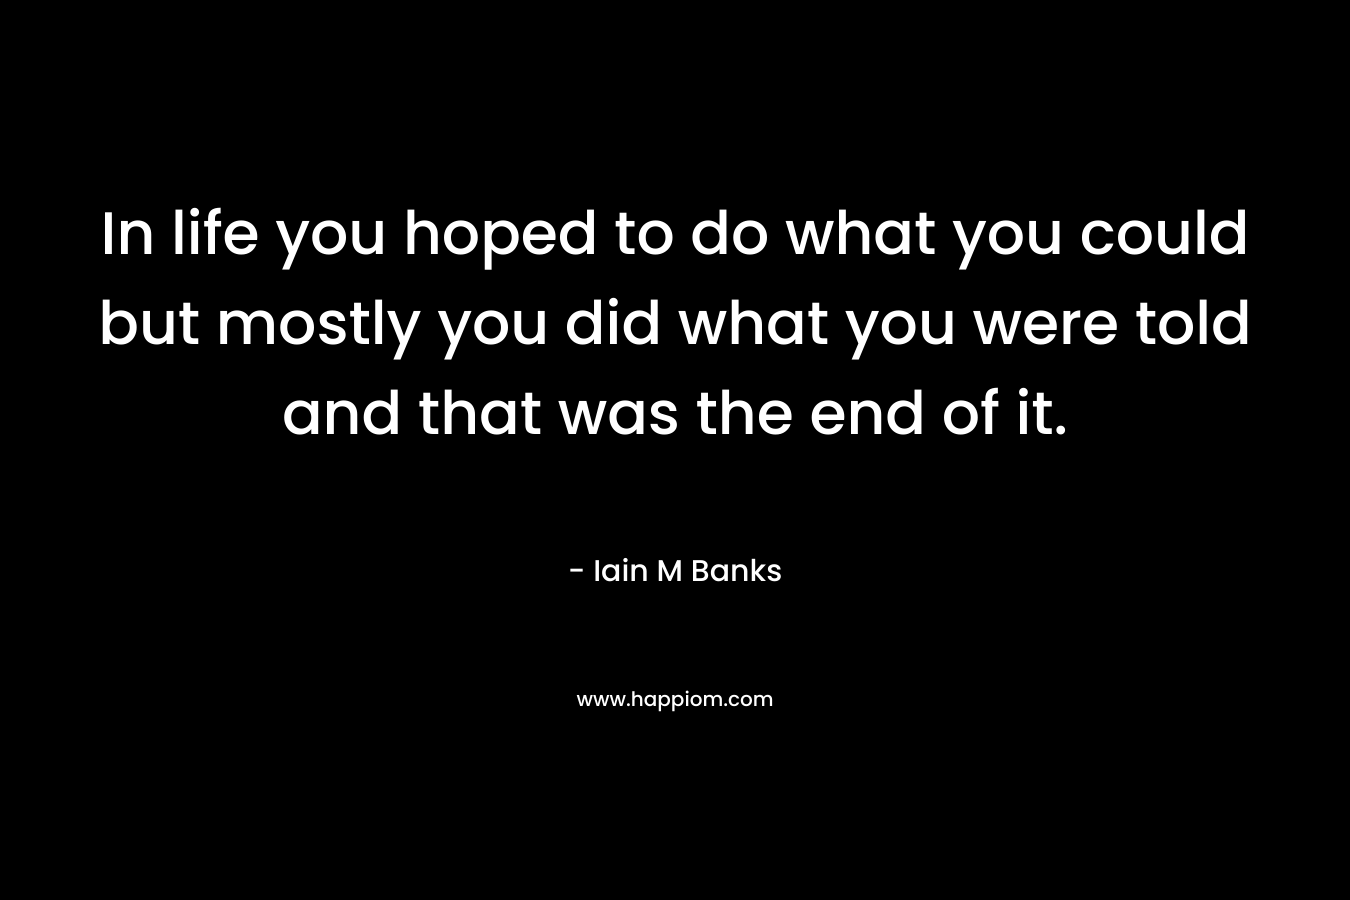 In life you hoped to do what you could but mostly you did what you were told and that was the end of it.